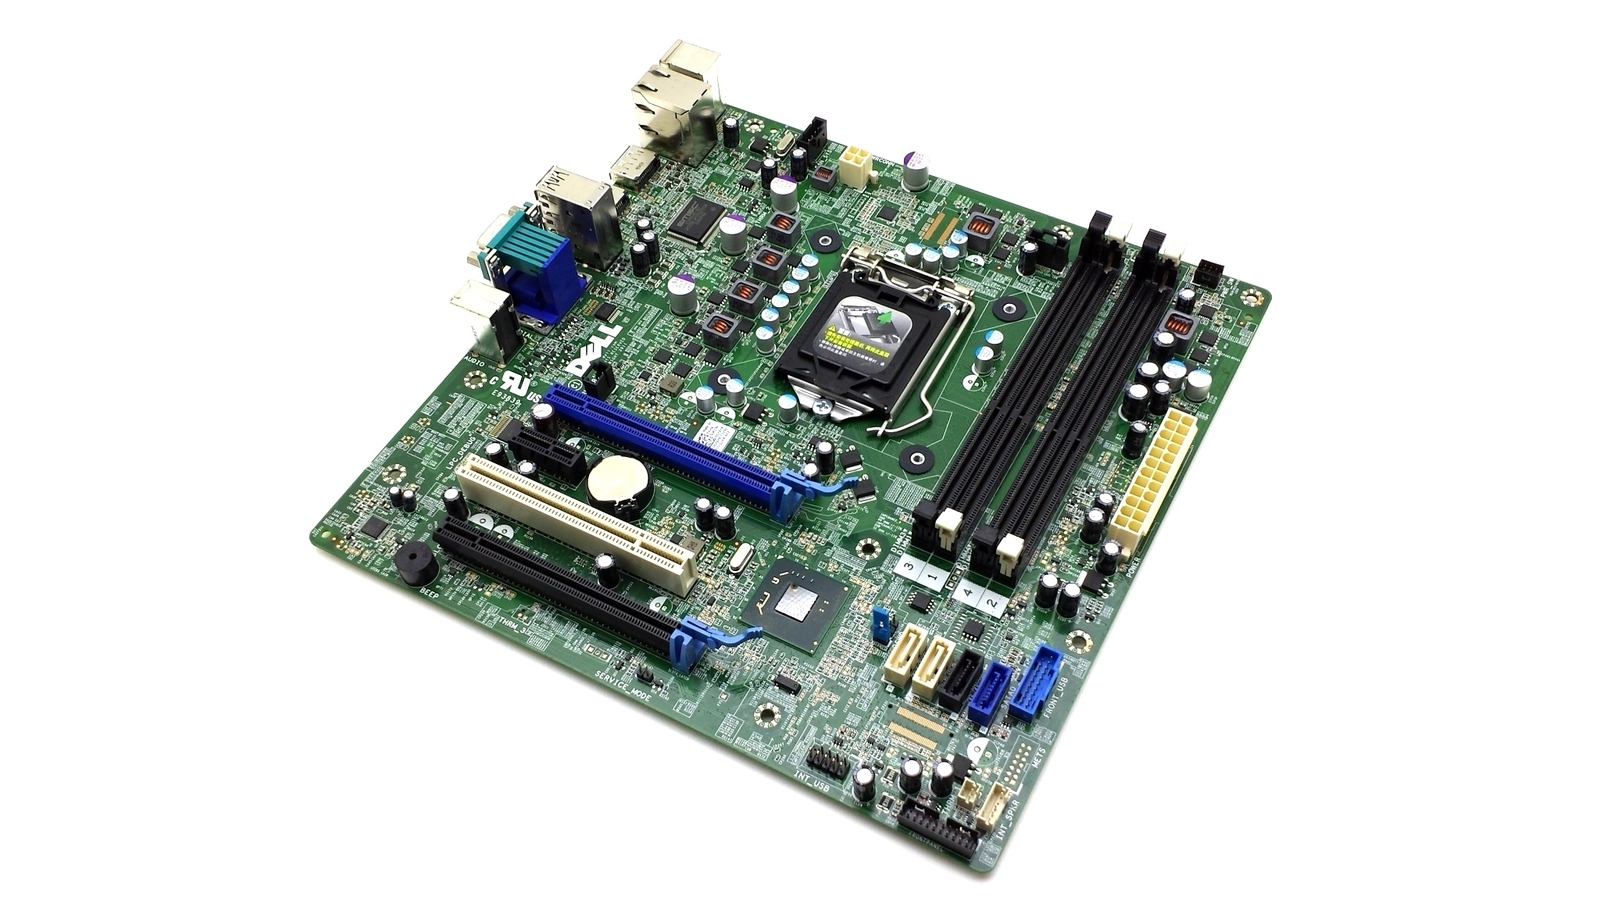 Dell mih61r motherboard drivers free download torrent